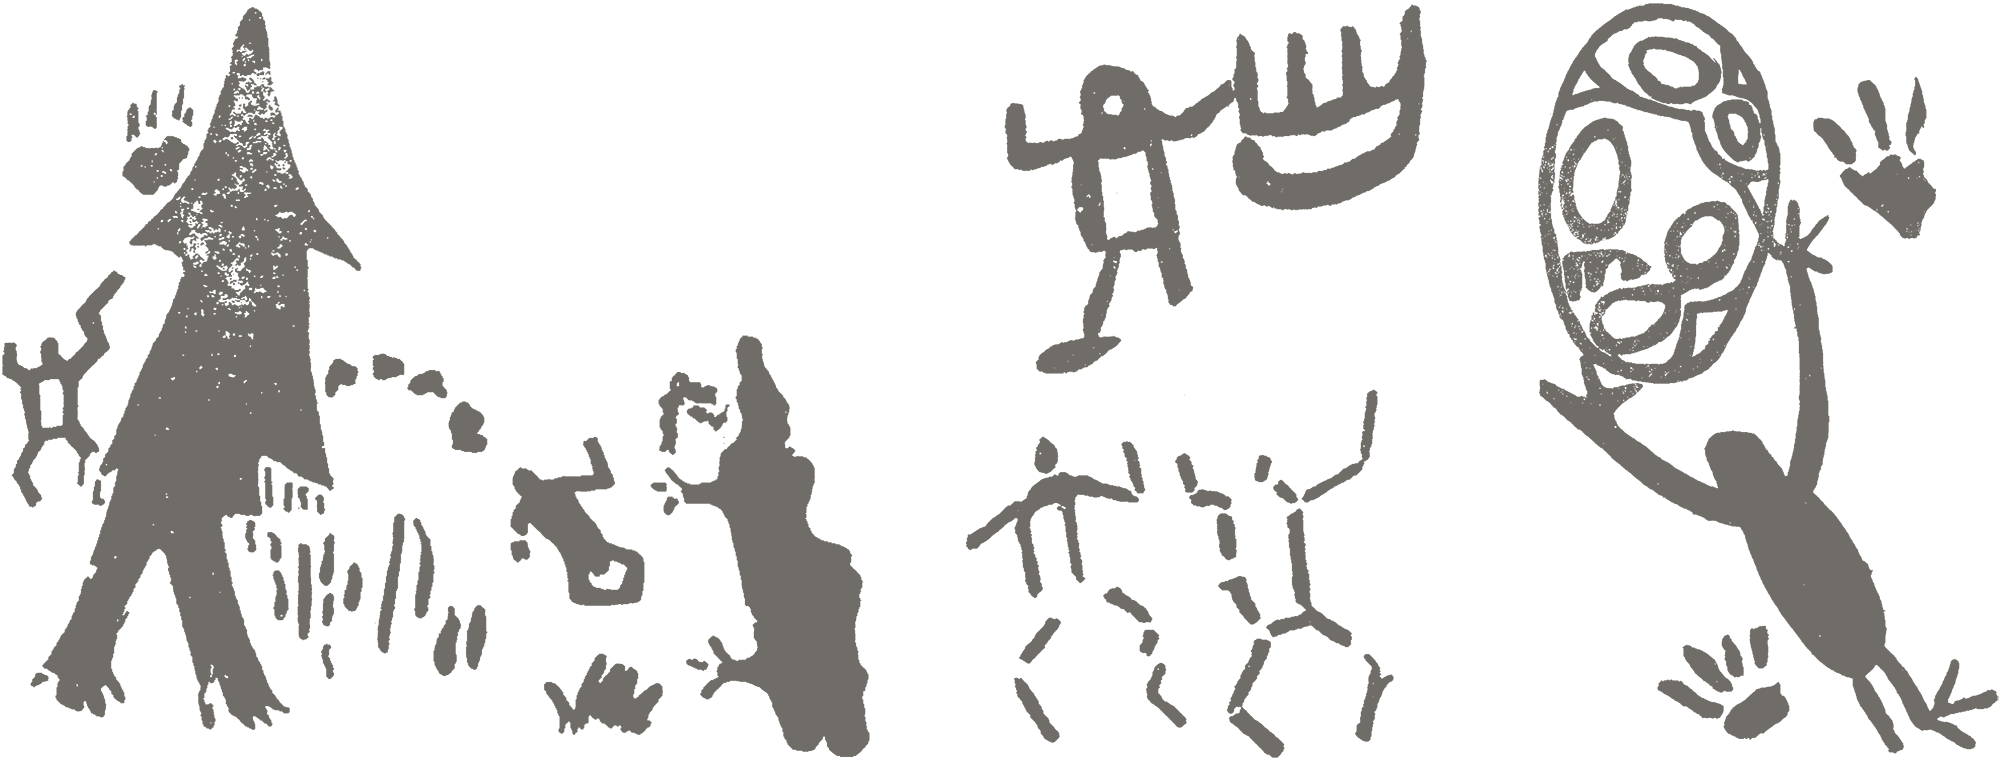 Rock Art Palau Micronesia Shapes that resemble a human body occur as stick-figures, hollow rectangles, and filled-in figures with heads, legs, and sometimes arms. Arms are often raised up as if in motion and some human-like images have facial features and spread fingers or toes